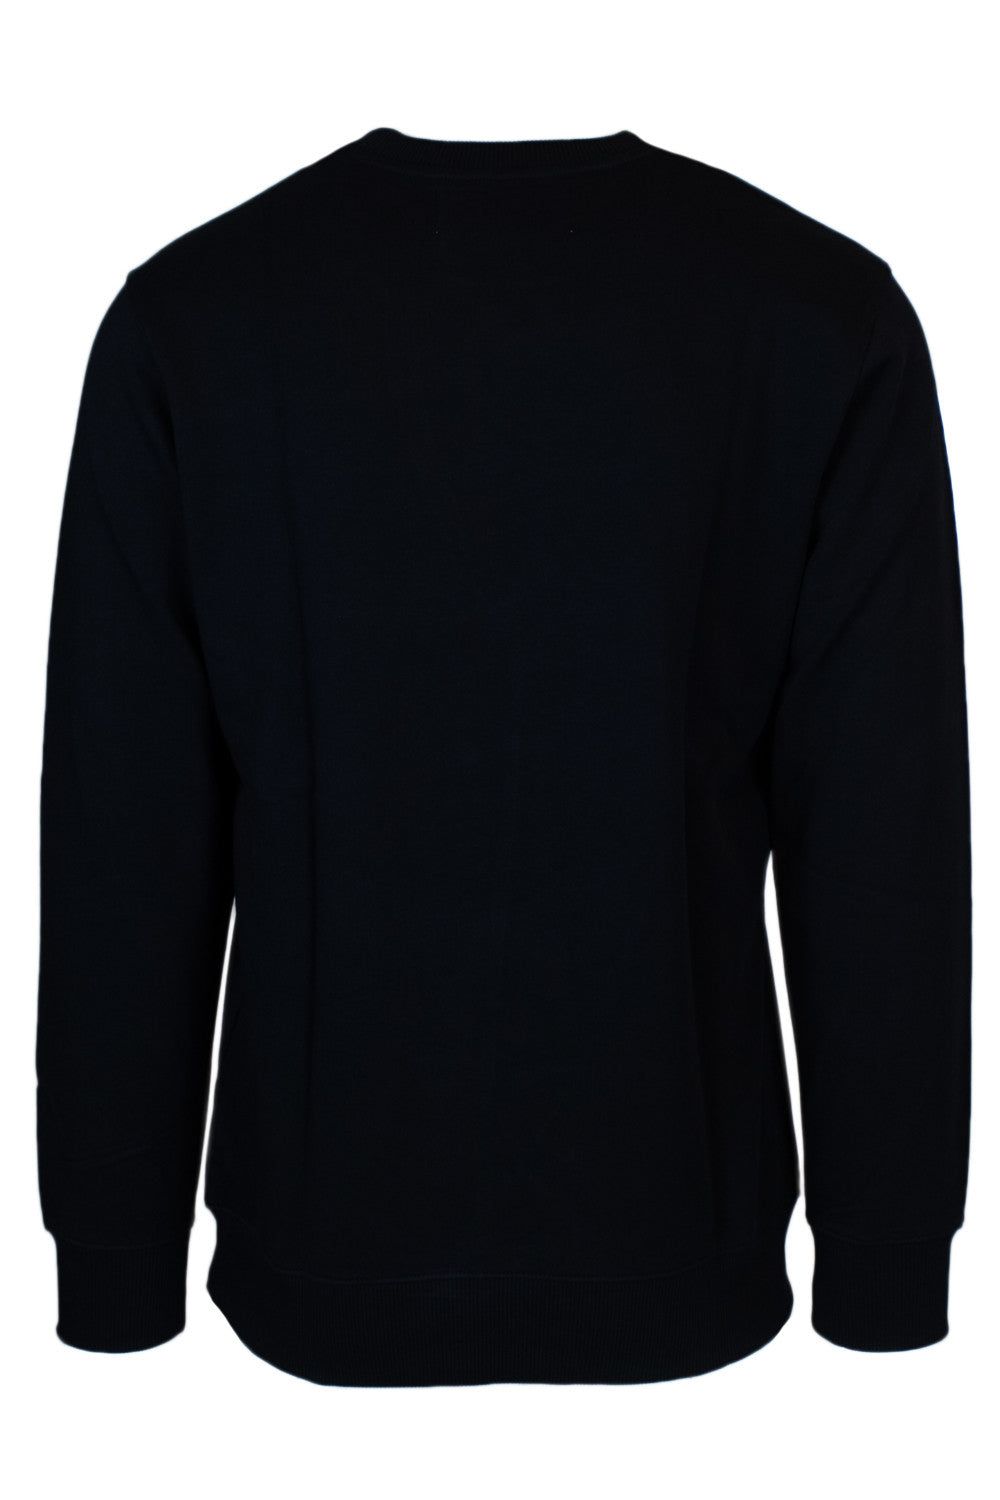 Brand: Calvin Klein Jeans
Gender: Men
Type: Sweatshirts
Season: Fall/Winter

PRODUCT DETAIL
• Color: black
• Pattern: print
• Fastening: slip on
• Sleeves: long
• Neckline: round neck

COMPOSITION AND MATERIAL
• Composition: -100% cotton 
•  Washing: machine wash at 30°